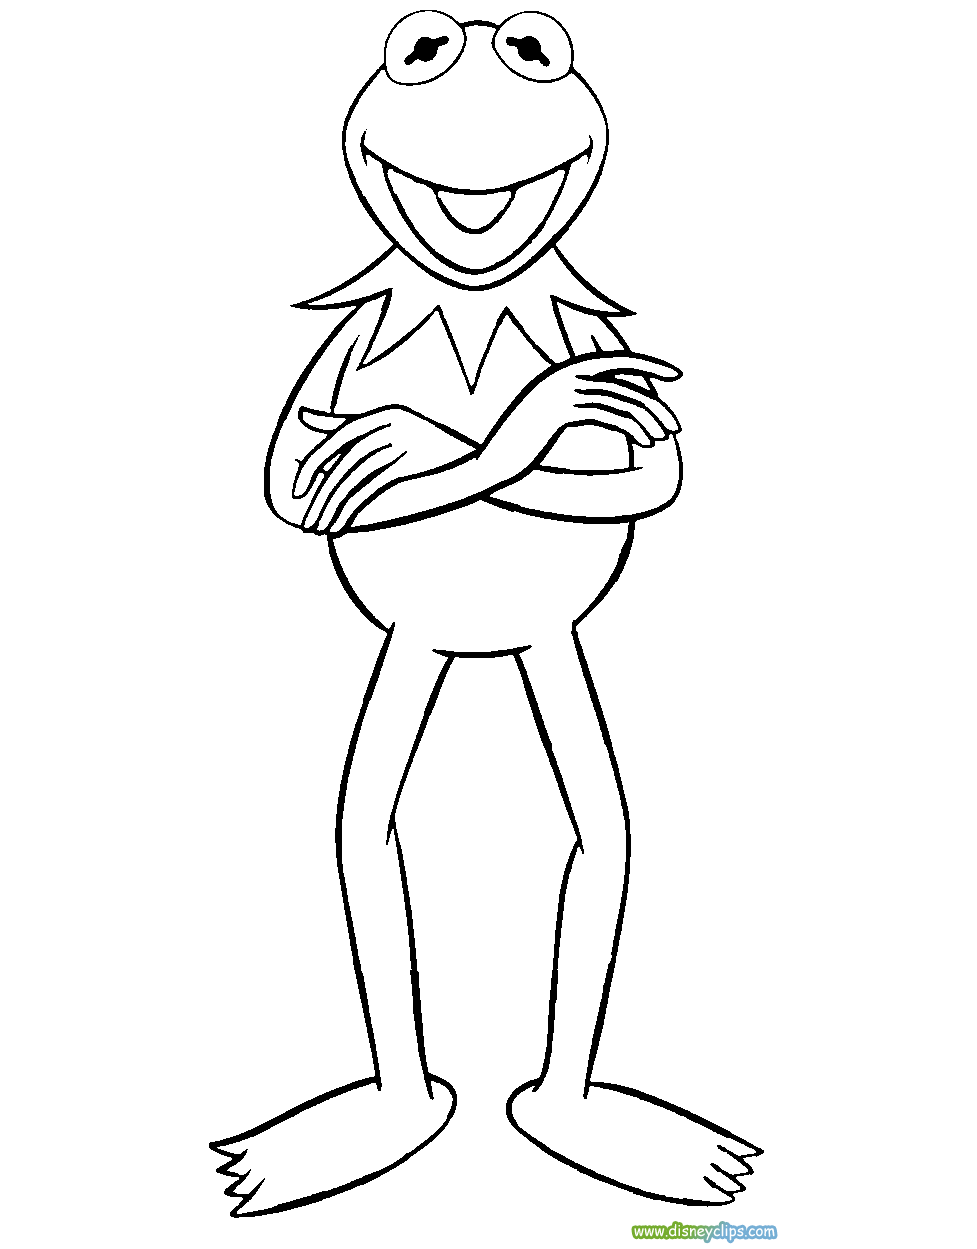 Kermit The Frog Coloring Page   Coloring Home